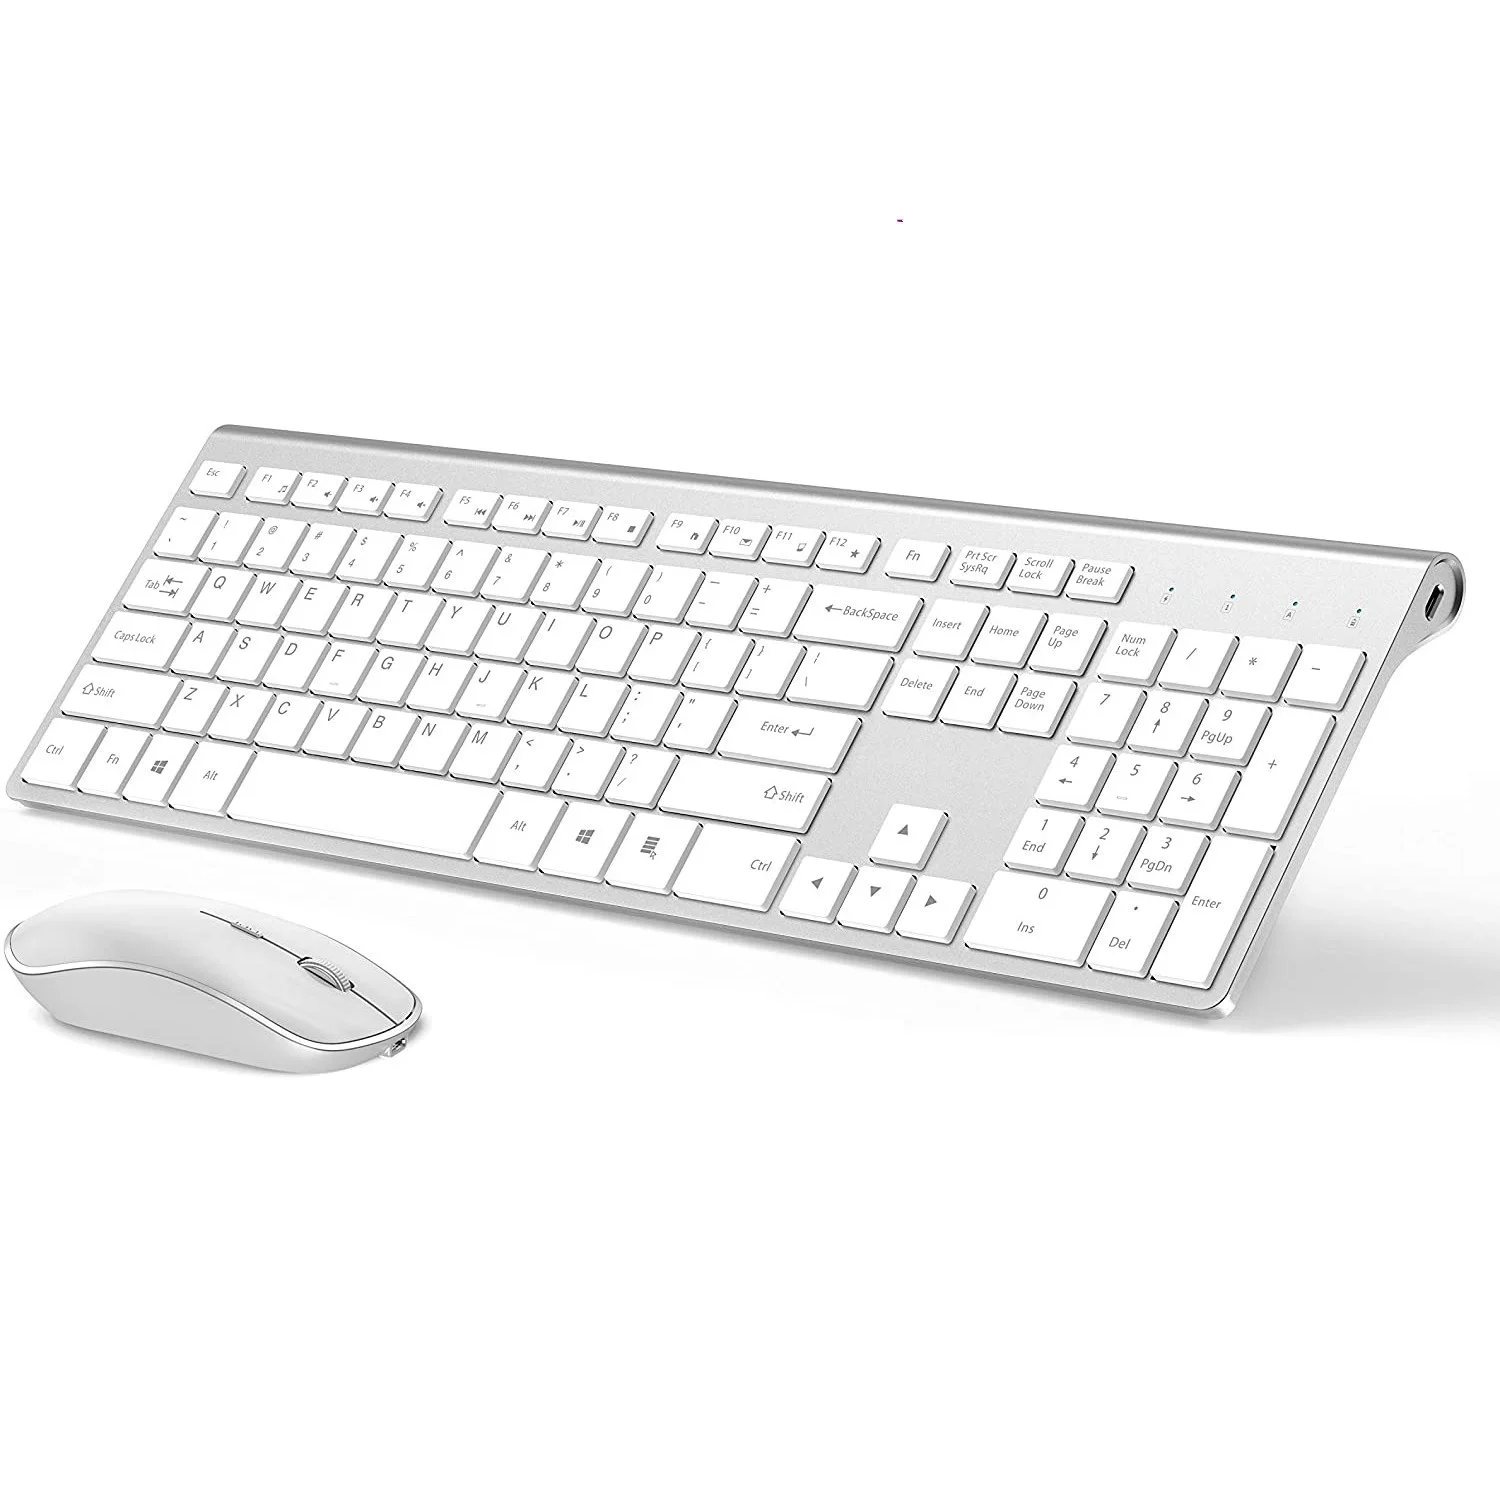 

2.4G Rechargeable Wireless Keyboard And Mouse Ergonomic Full-Size Design Russian/English/German/French Laptop/PC/ Windows Silver